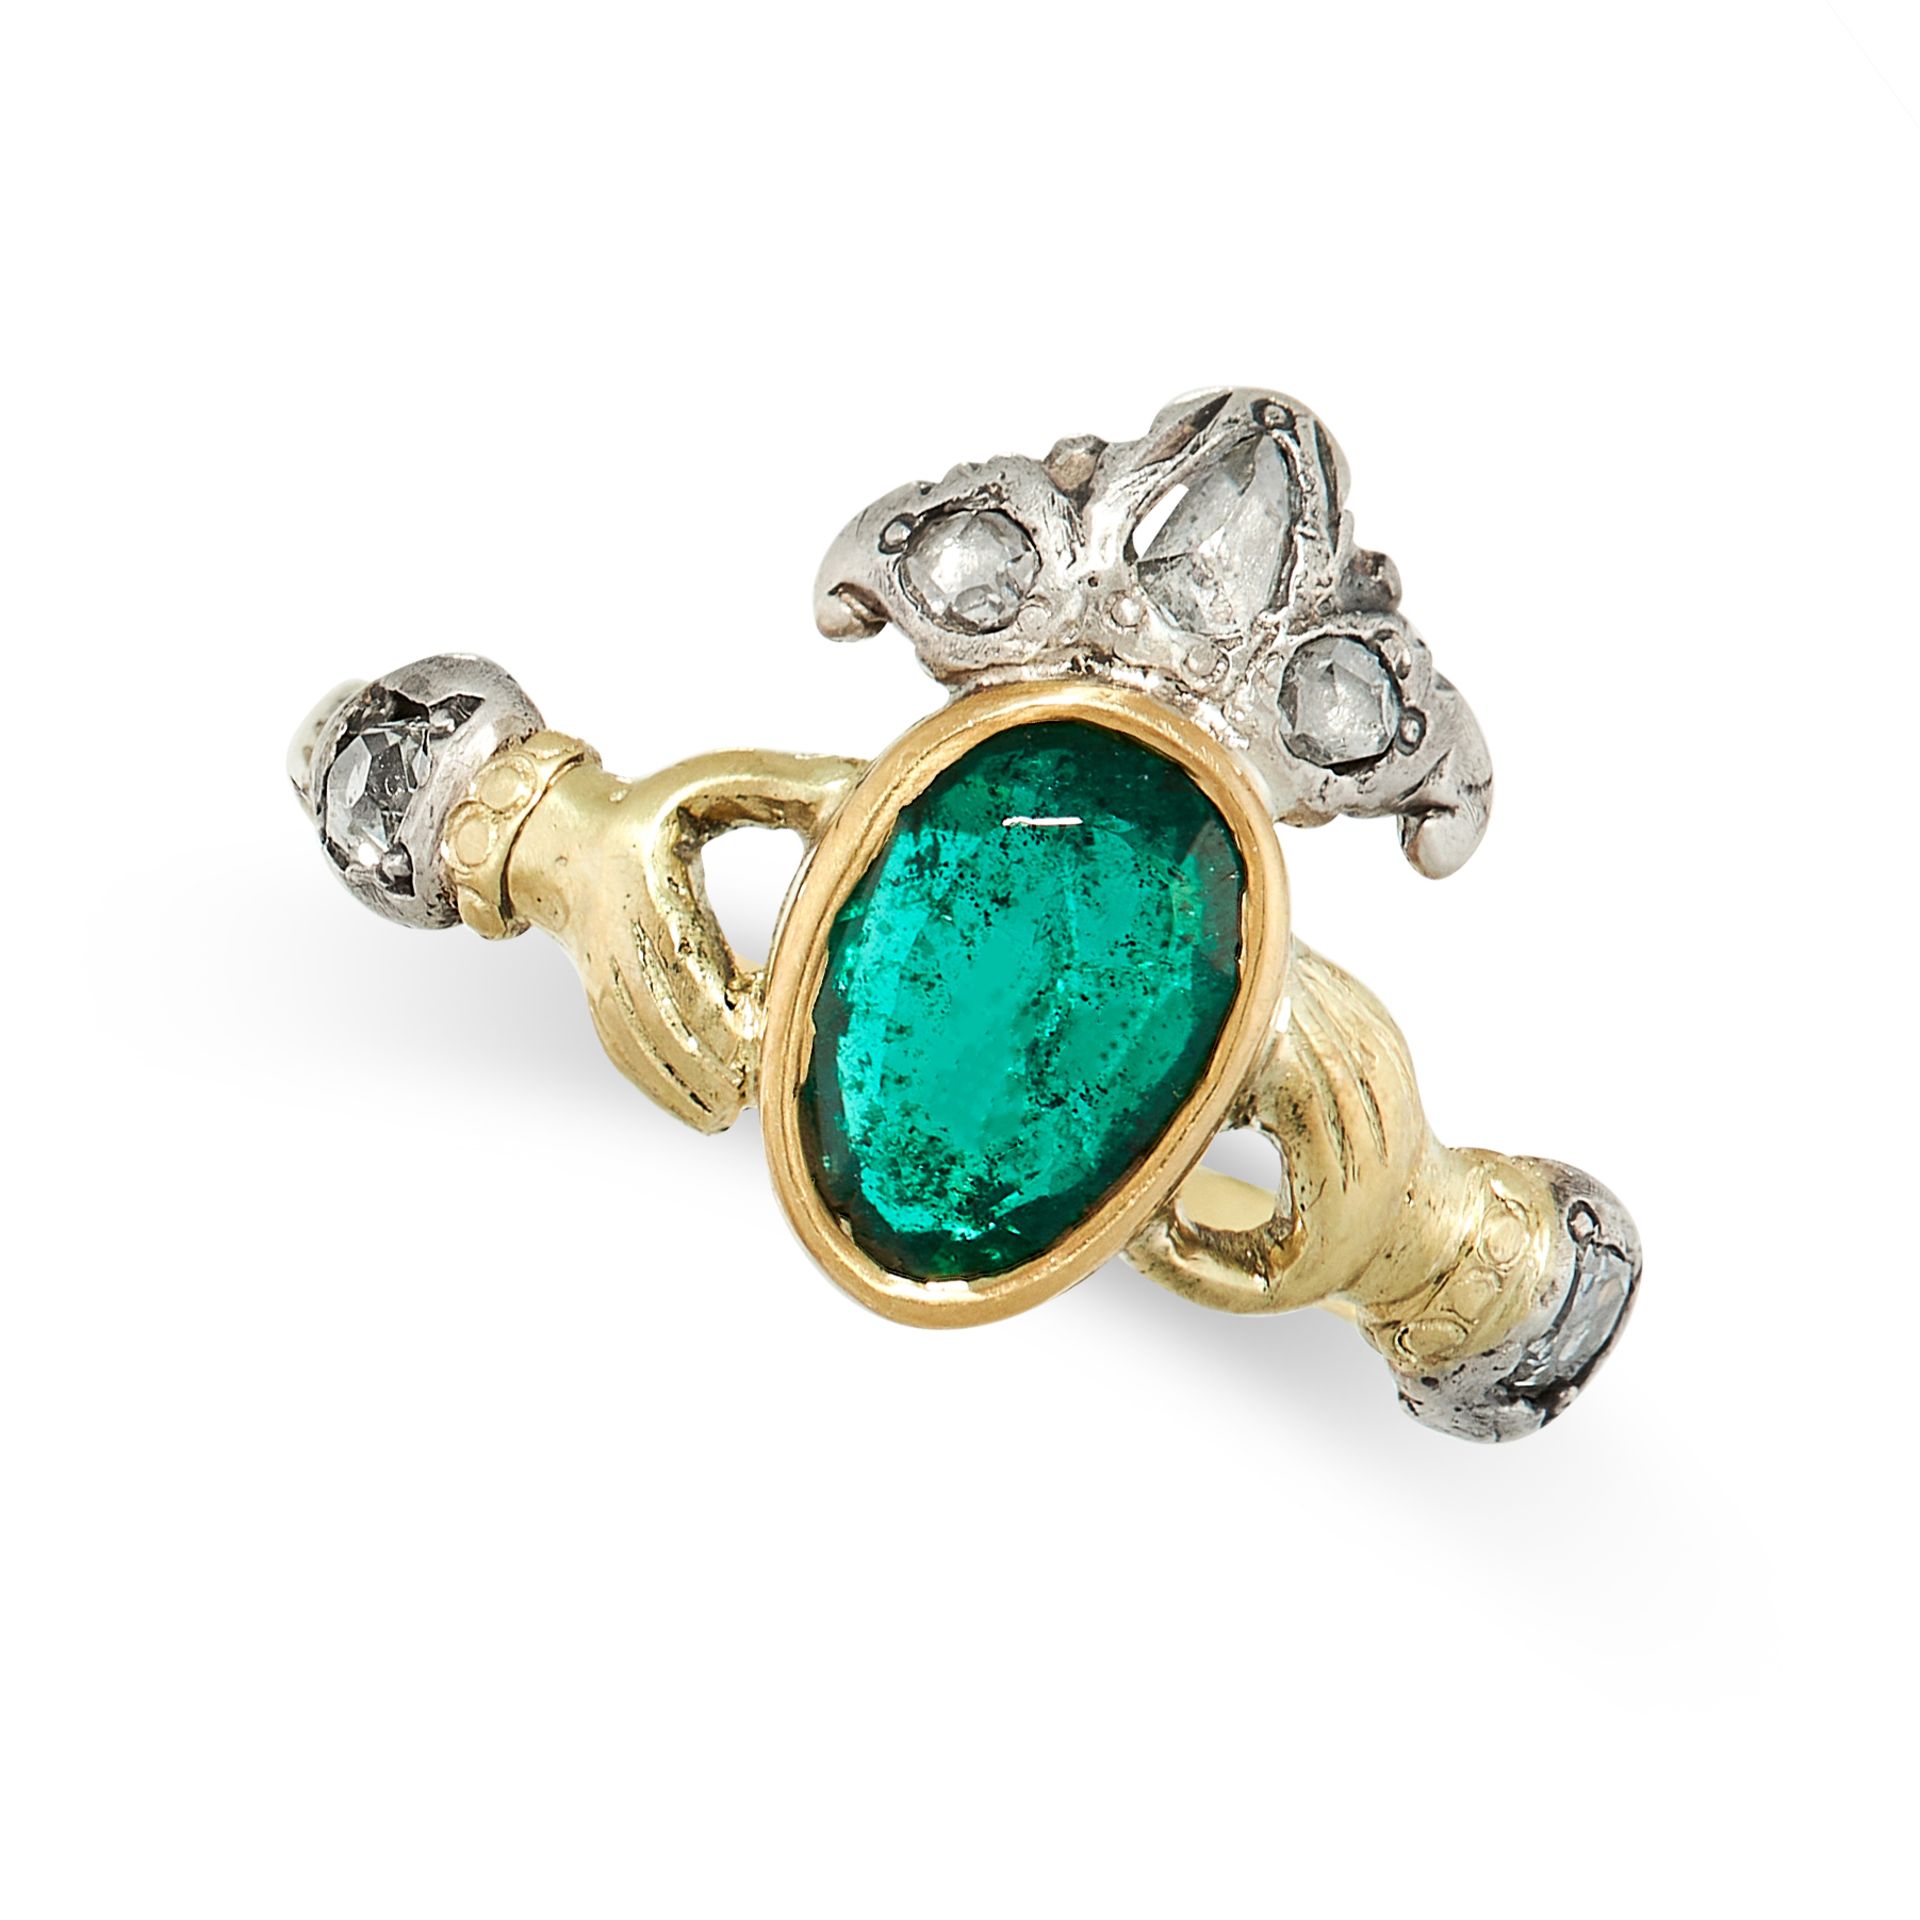 ANTIQUE EMERALD AND DIAMOND RING in yellow gold and silver, set with a central oval cut emerald of